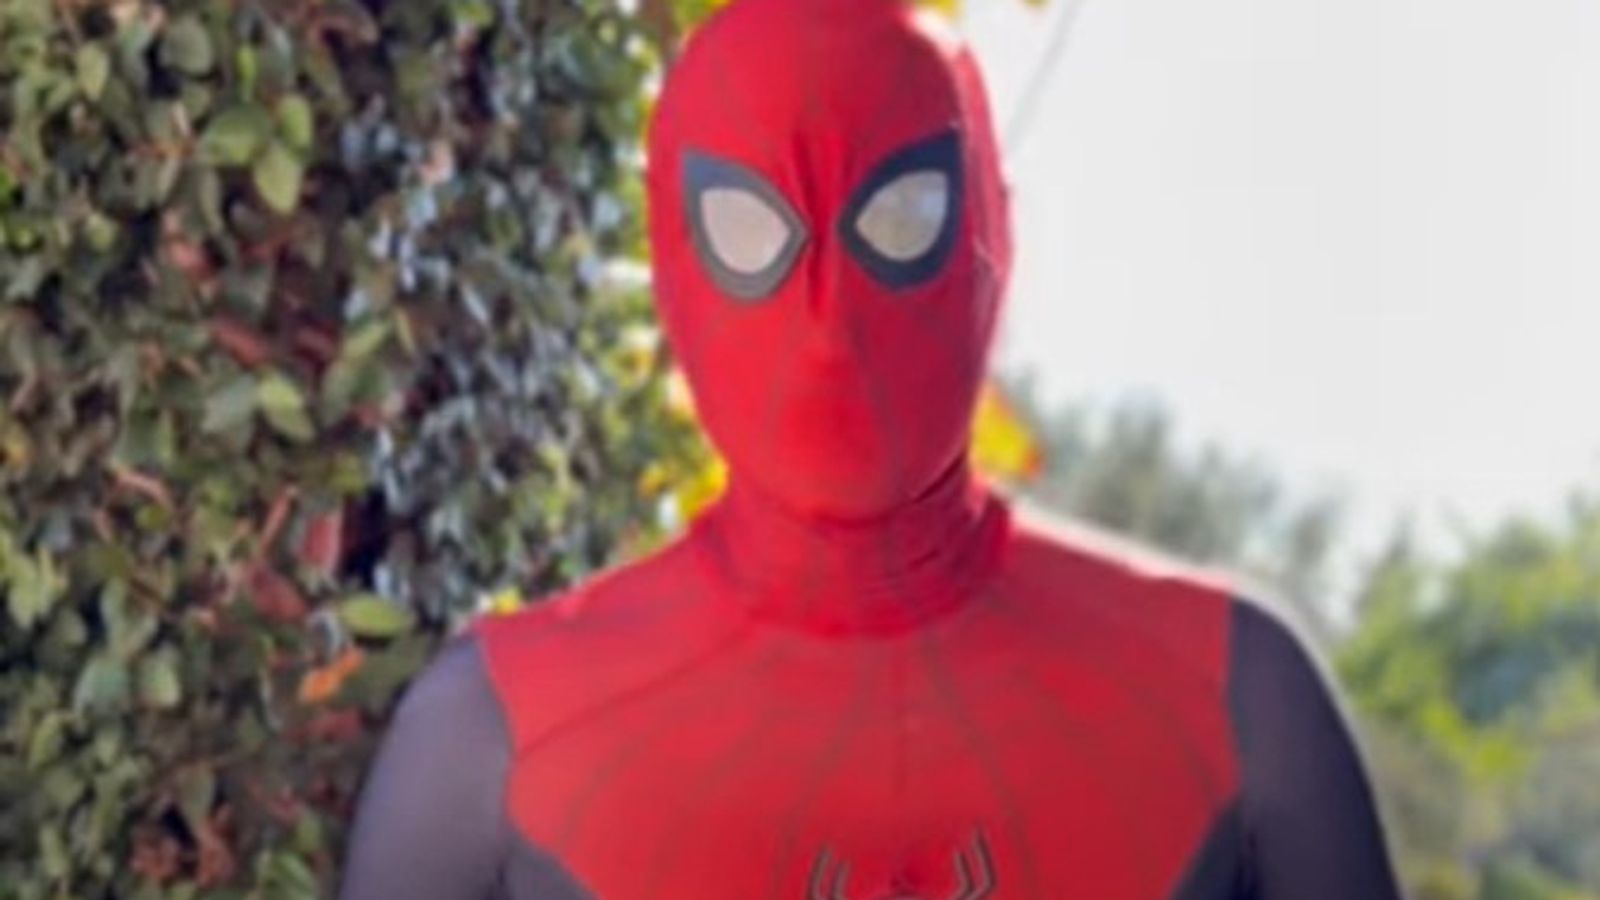 Prince Harry sends Christmas message to bereaved military children - while dressed as Spider-Man